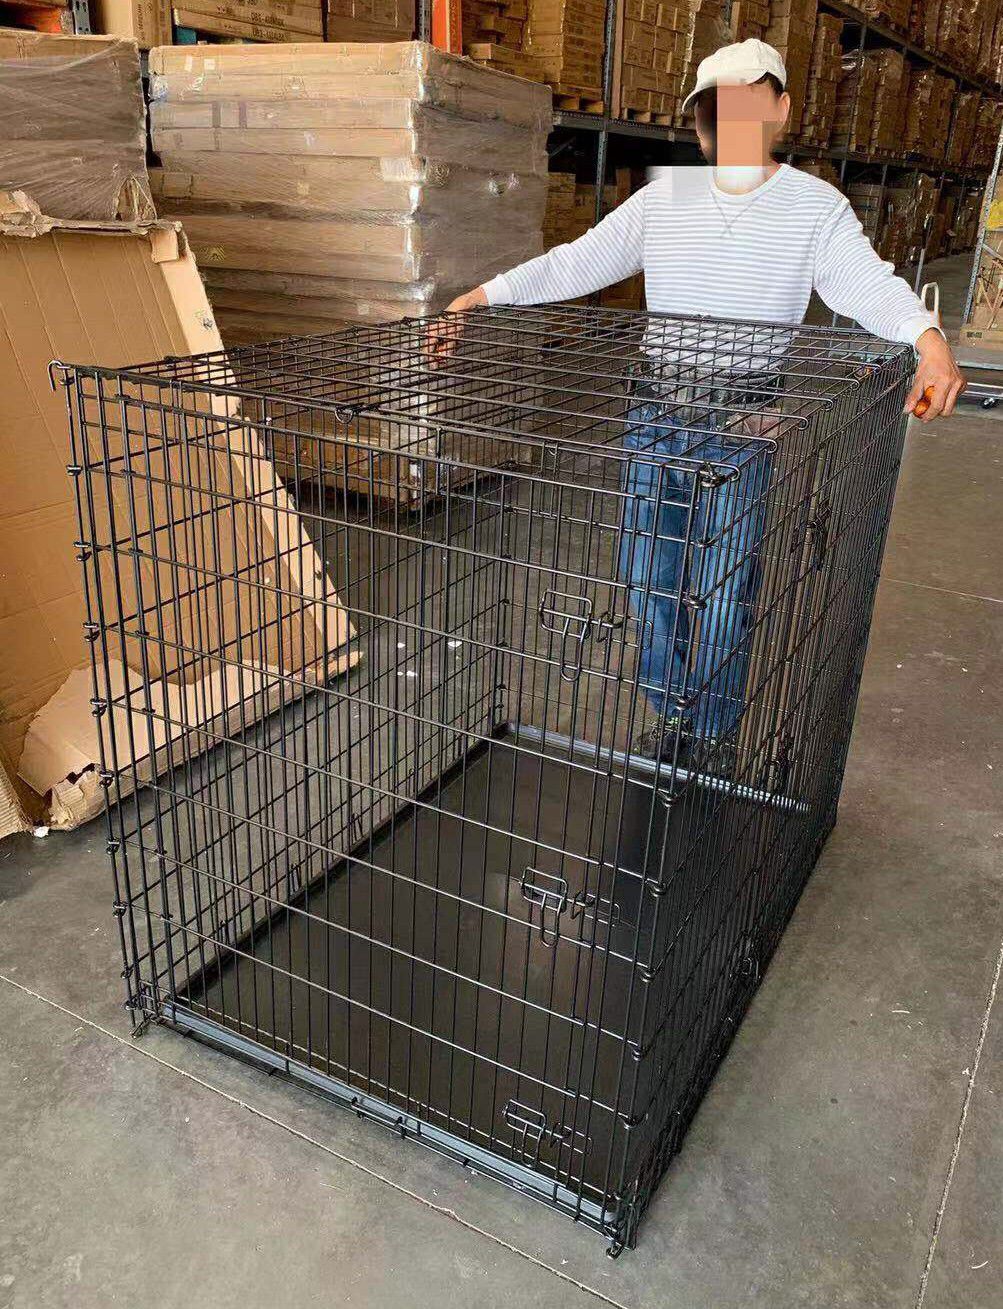 XXL 54x36x45 inches tall large 2 doors heavy duty dog cage crate kennel 200 lbs capacity assembly required some minor wear and tear jaula de perro